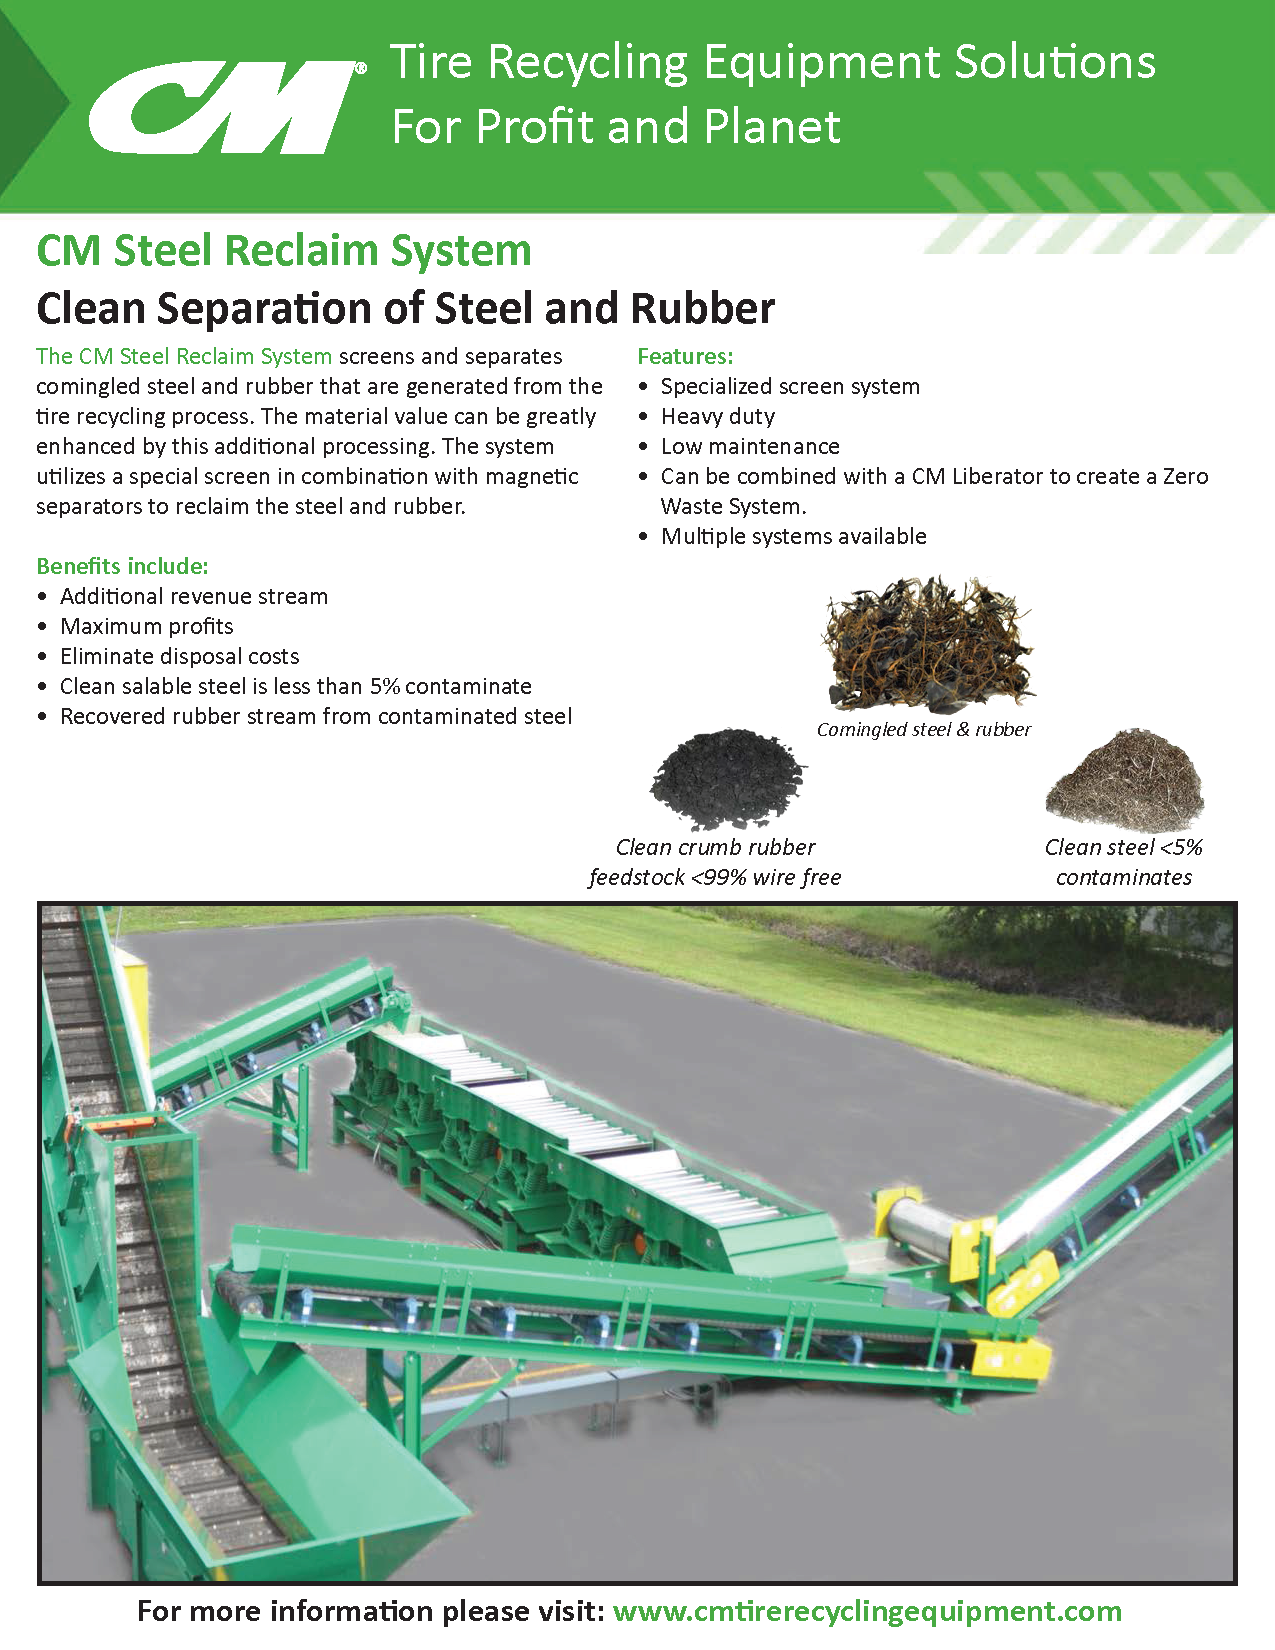 Learn more by viewing the CM Steel Reclaim System Brochure